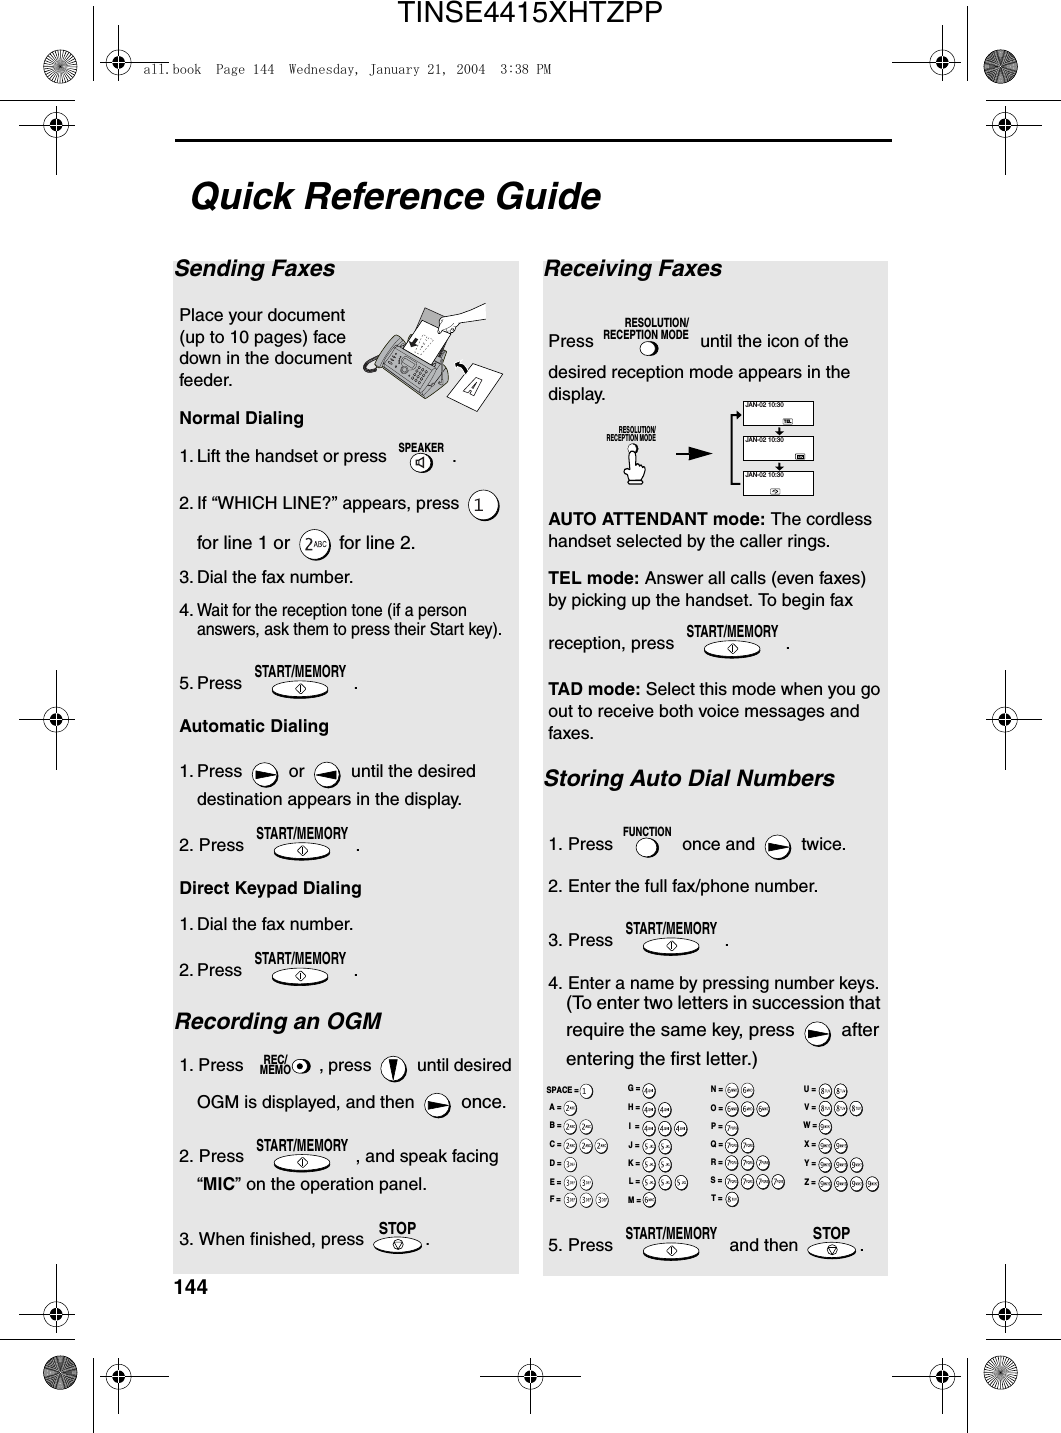 144Quick Reference GuideSending FaxesPlace your document (up to 10 pages) face down in the document feeder.Normal Dialing 1. Lift the handset or press  .2. If “WHICH LINE?” appears, press   for line 1 or   for line 2.3. Dial the fax number. 4.Wait for the reception tone (if a person answers, ask them to press their Start key). 5. Press .Automatic Dialing1. Press   or   until the desired destination appears in the display.2. Press  .Direct Keypad Dialing  1. Dial the fax number. 2. Press .Recording an OGM1. Press  , press   until desired OGM is displayed, and then   once.2. Press  , and speak facing “MIC” on the operation panel.3. When finished, press  .SPEAKERSTART/MEMORYSTART/MEMORYSTART/MEMORYREC/MEMOSTART/MEMORYSTOPReceiving FaxesPress   until the icon of the desired reception mode appears in the display.AUTO ATTENDANT mode: The cordless handset selected by the caller rings.TEL mode: Answer all calls (even faxes) by picking up the handset. To begin fax reception, press  .TAD mode: Select this mode when you go out to receive both voice messages and faxes.Storing Auto Dial Numbers1. Press   once and   twice.2. Enter the full fax/phone number.3. Press  .4. Enter a name by pressing number keys. (To enter two letters in succession that require the same key, press   after entering the first letter.)5. Press   and then  .RESOLUTION/RECEPTION MODESTART/MEMORYFUNCTIONSTART/MEMORYSTART/MEMORYSTOPTELJAN-02 10:30JAN-02 10:30JAN-02 10:30RESOLUTION/RECEPTION MODEA =B =C =D =E =F =G =H =I  =J =K =L =M =N =O =P =Q =R =S =T =U =V =W =X =Y =Z =SPACE =all.book  Page 144  Wednesday, January 21, 2004  3:38 PMTINSE4415XHTZPP